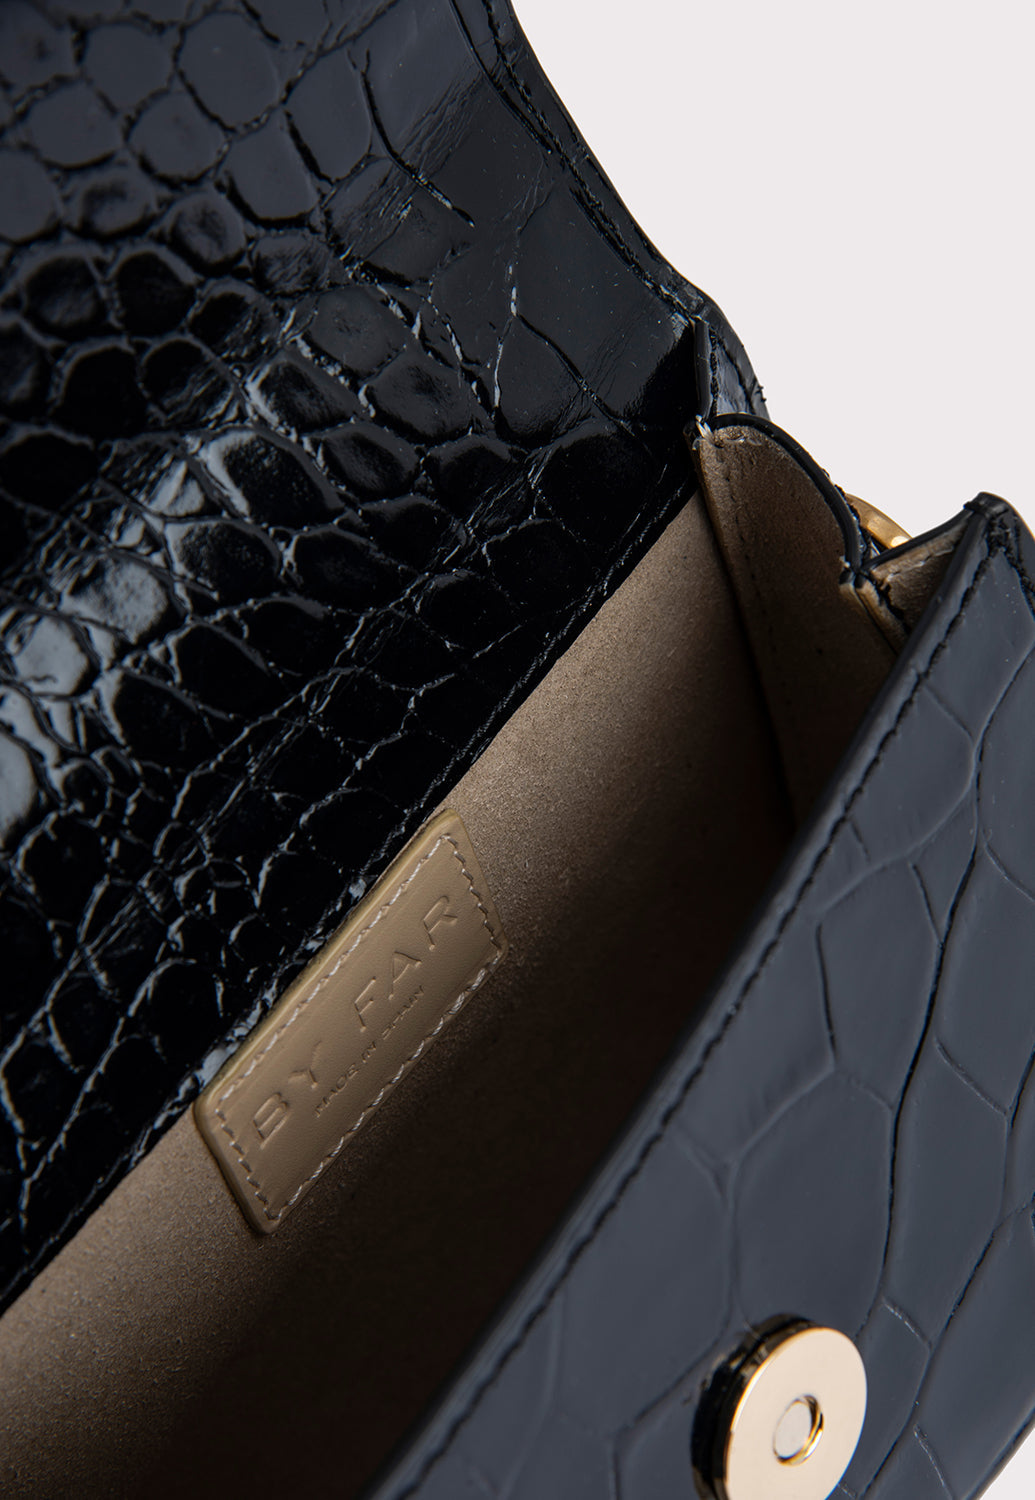 Mini Black Croco Embossed Leather – BY FAR